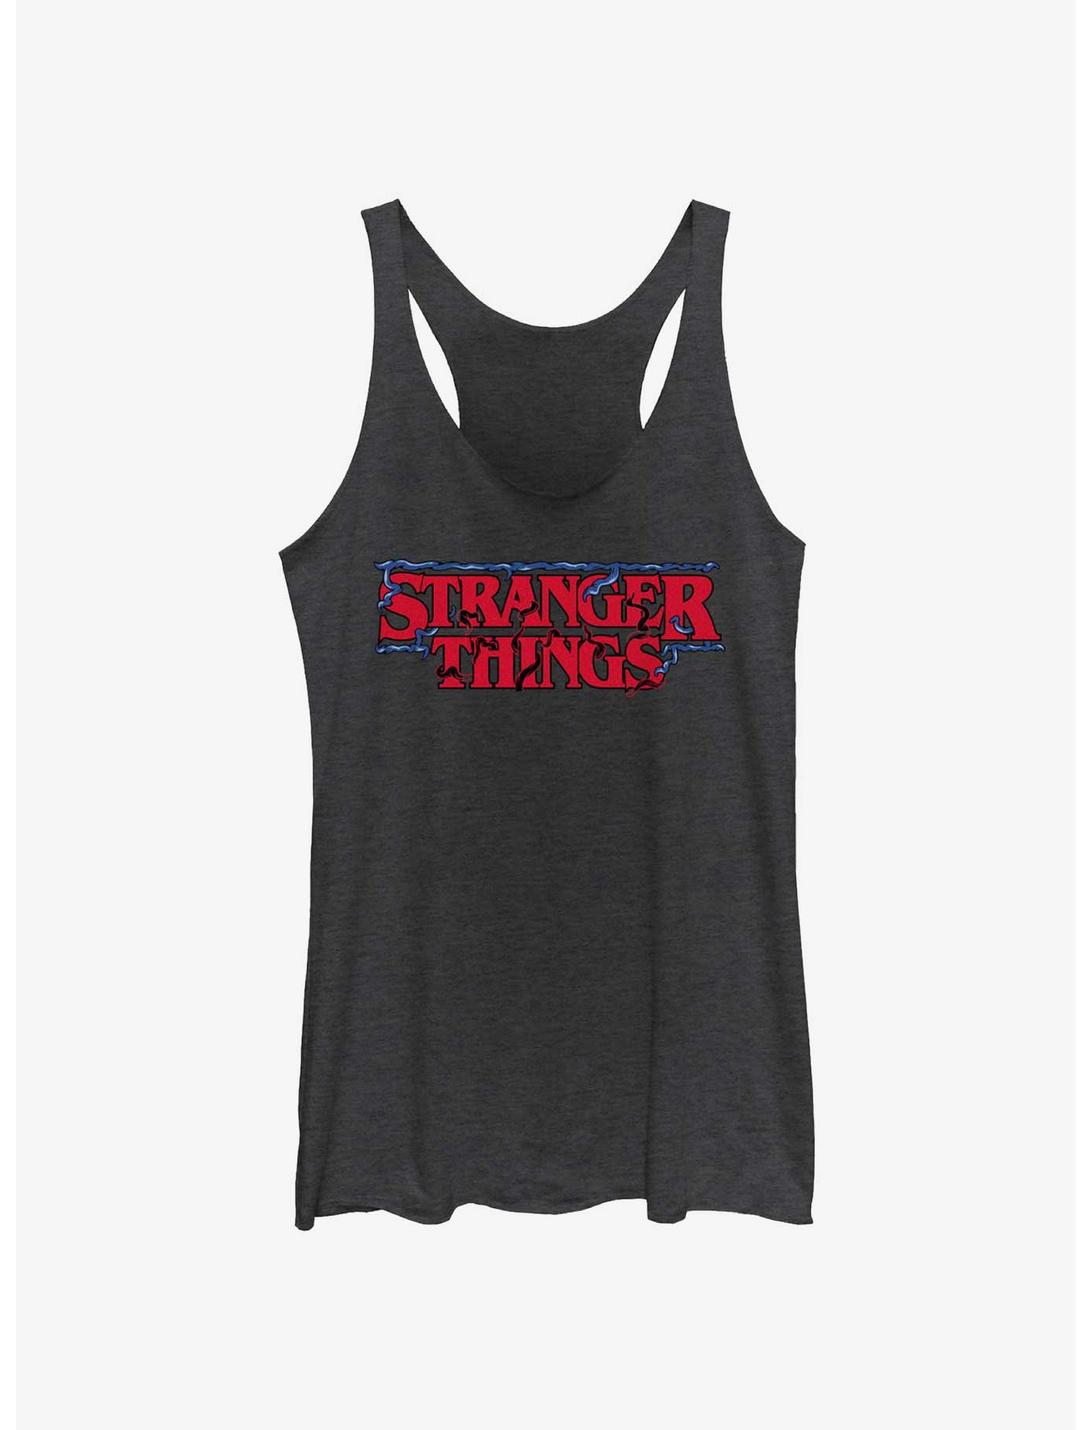 Stranger Things Intertwined Vines Logo Womens Tank Top, BLK HTR, hi-res